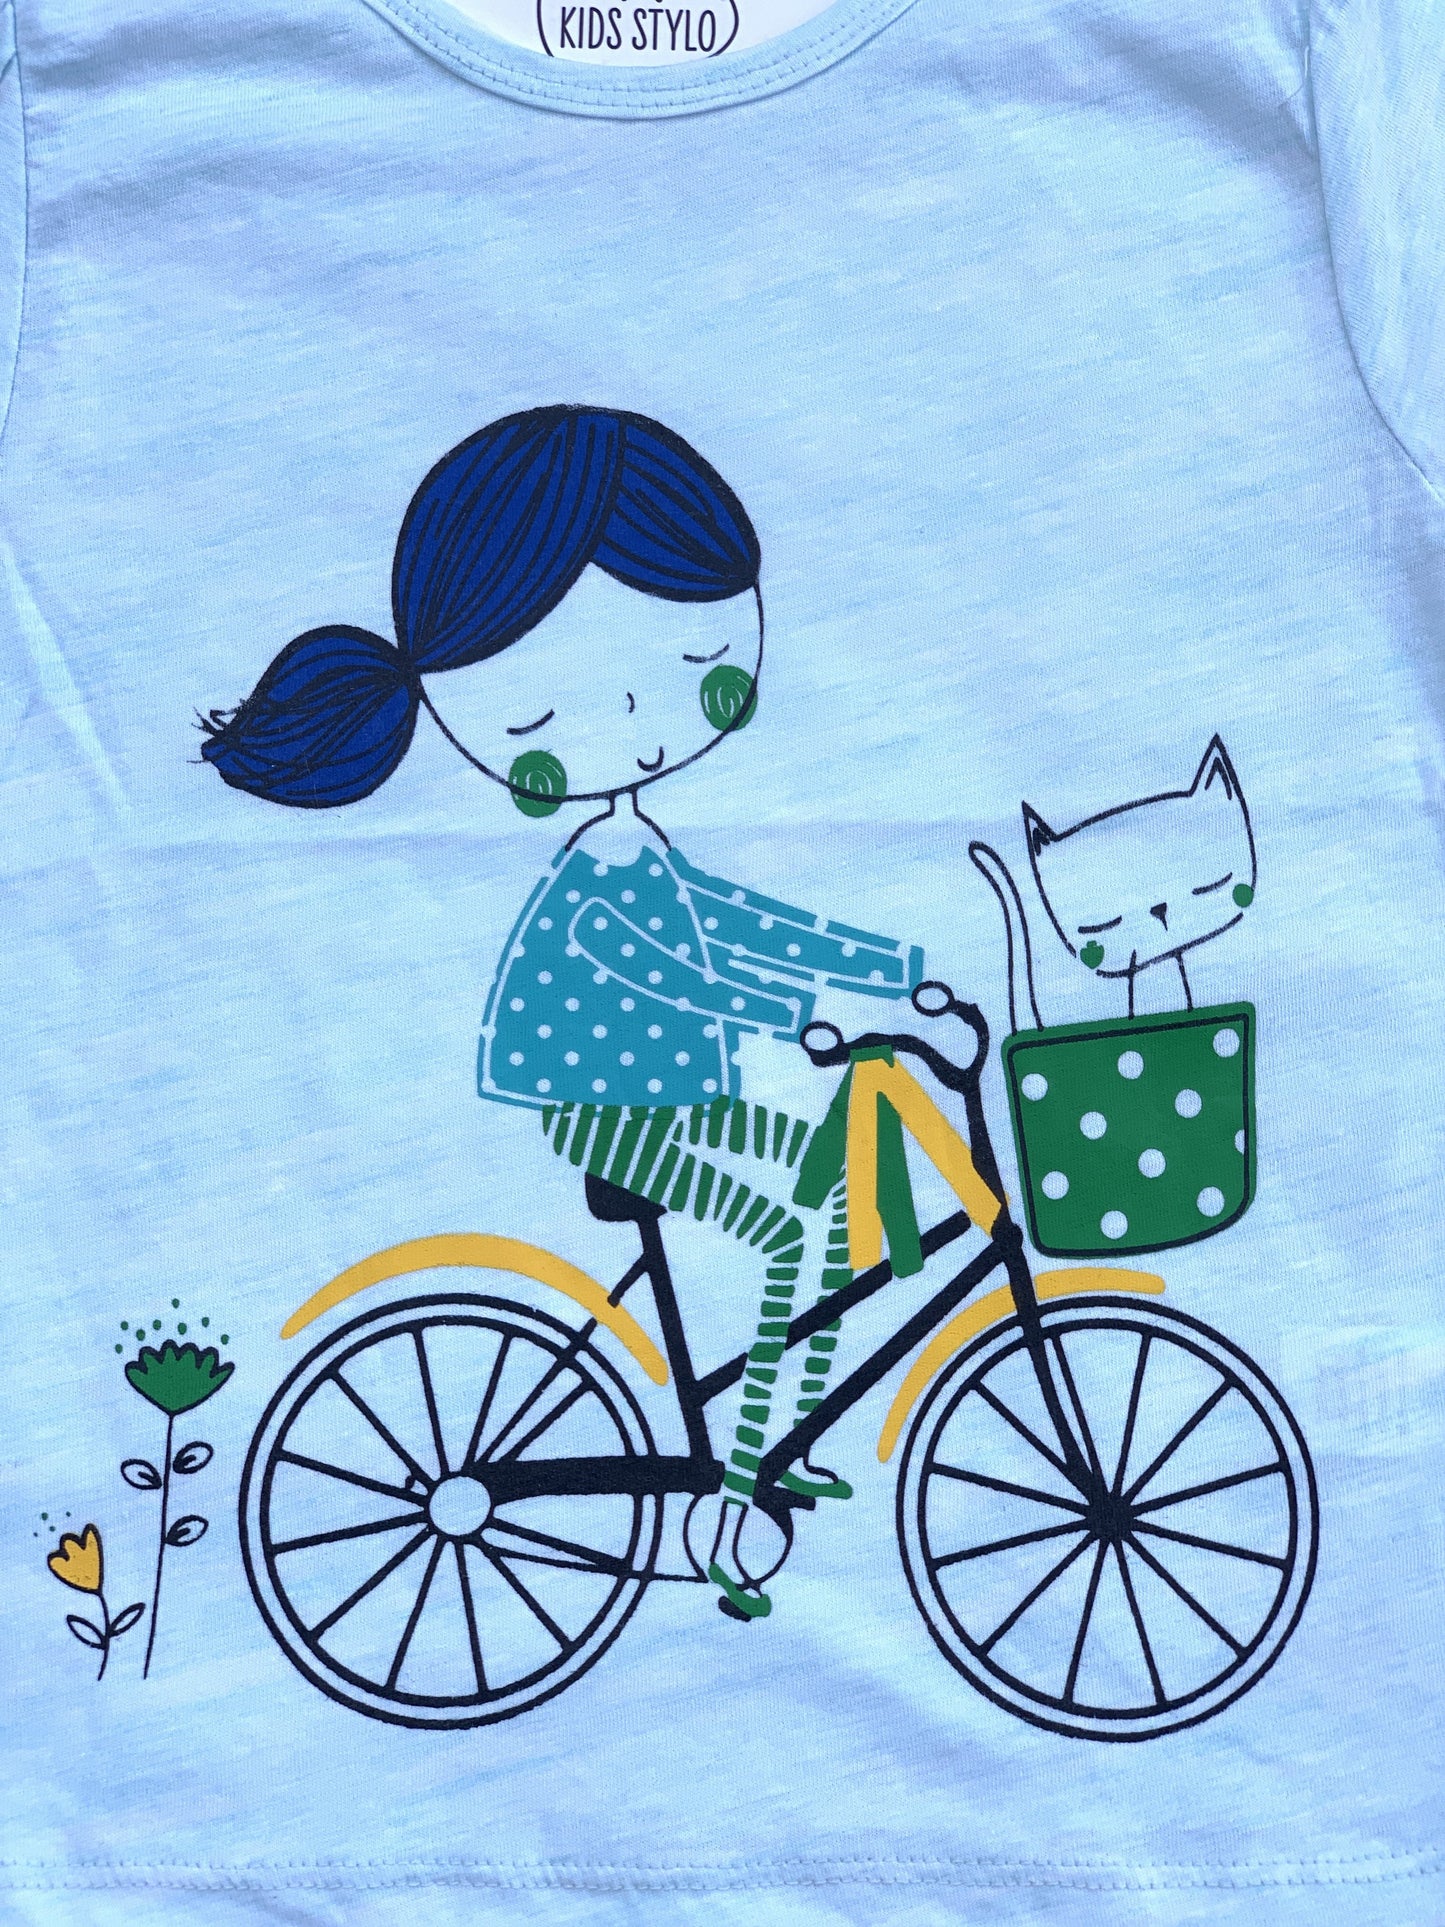 Light Skyblue Bicycle Doll